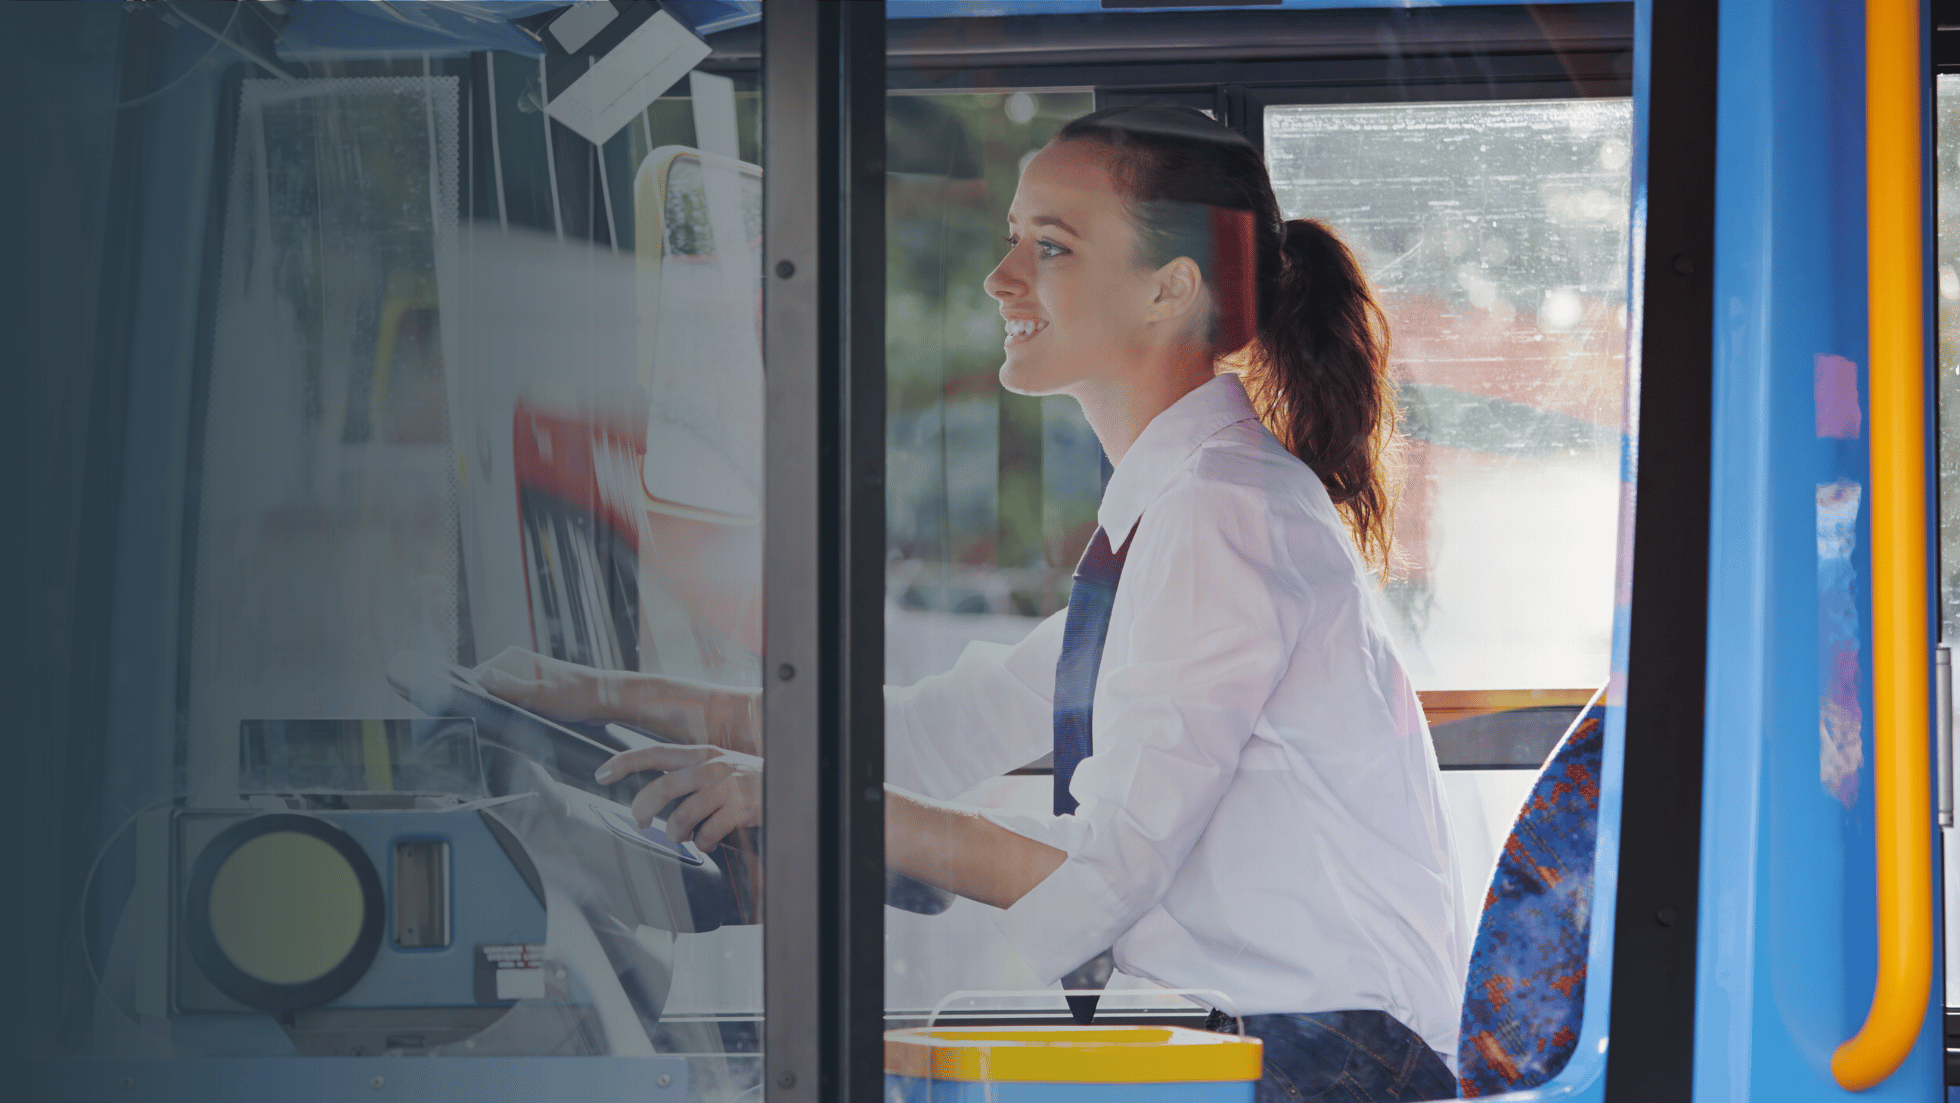 Driving Diversity: Why the UK Transport Industry Needs More Female Representation